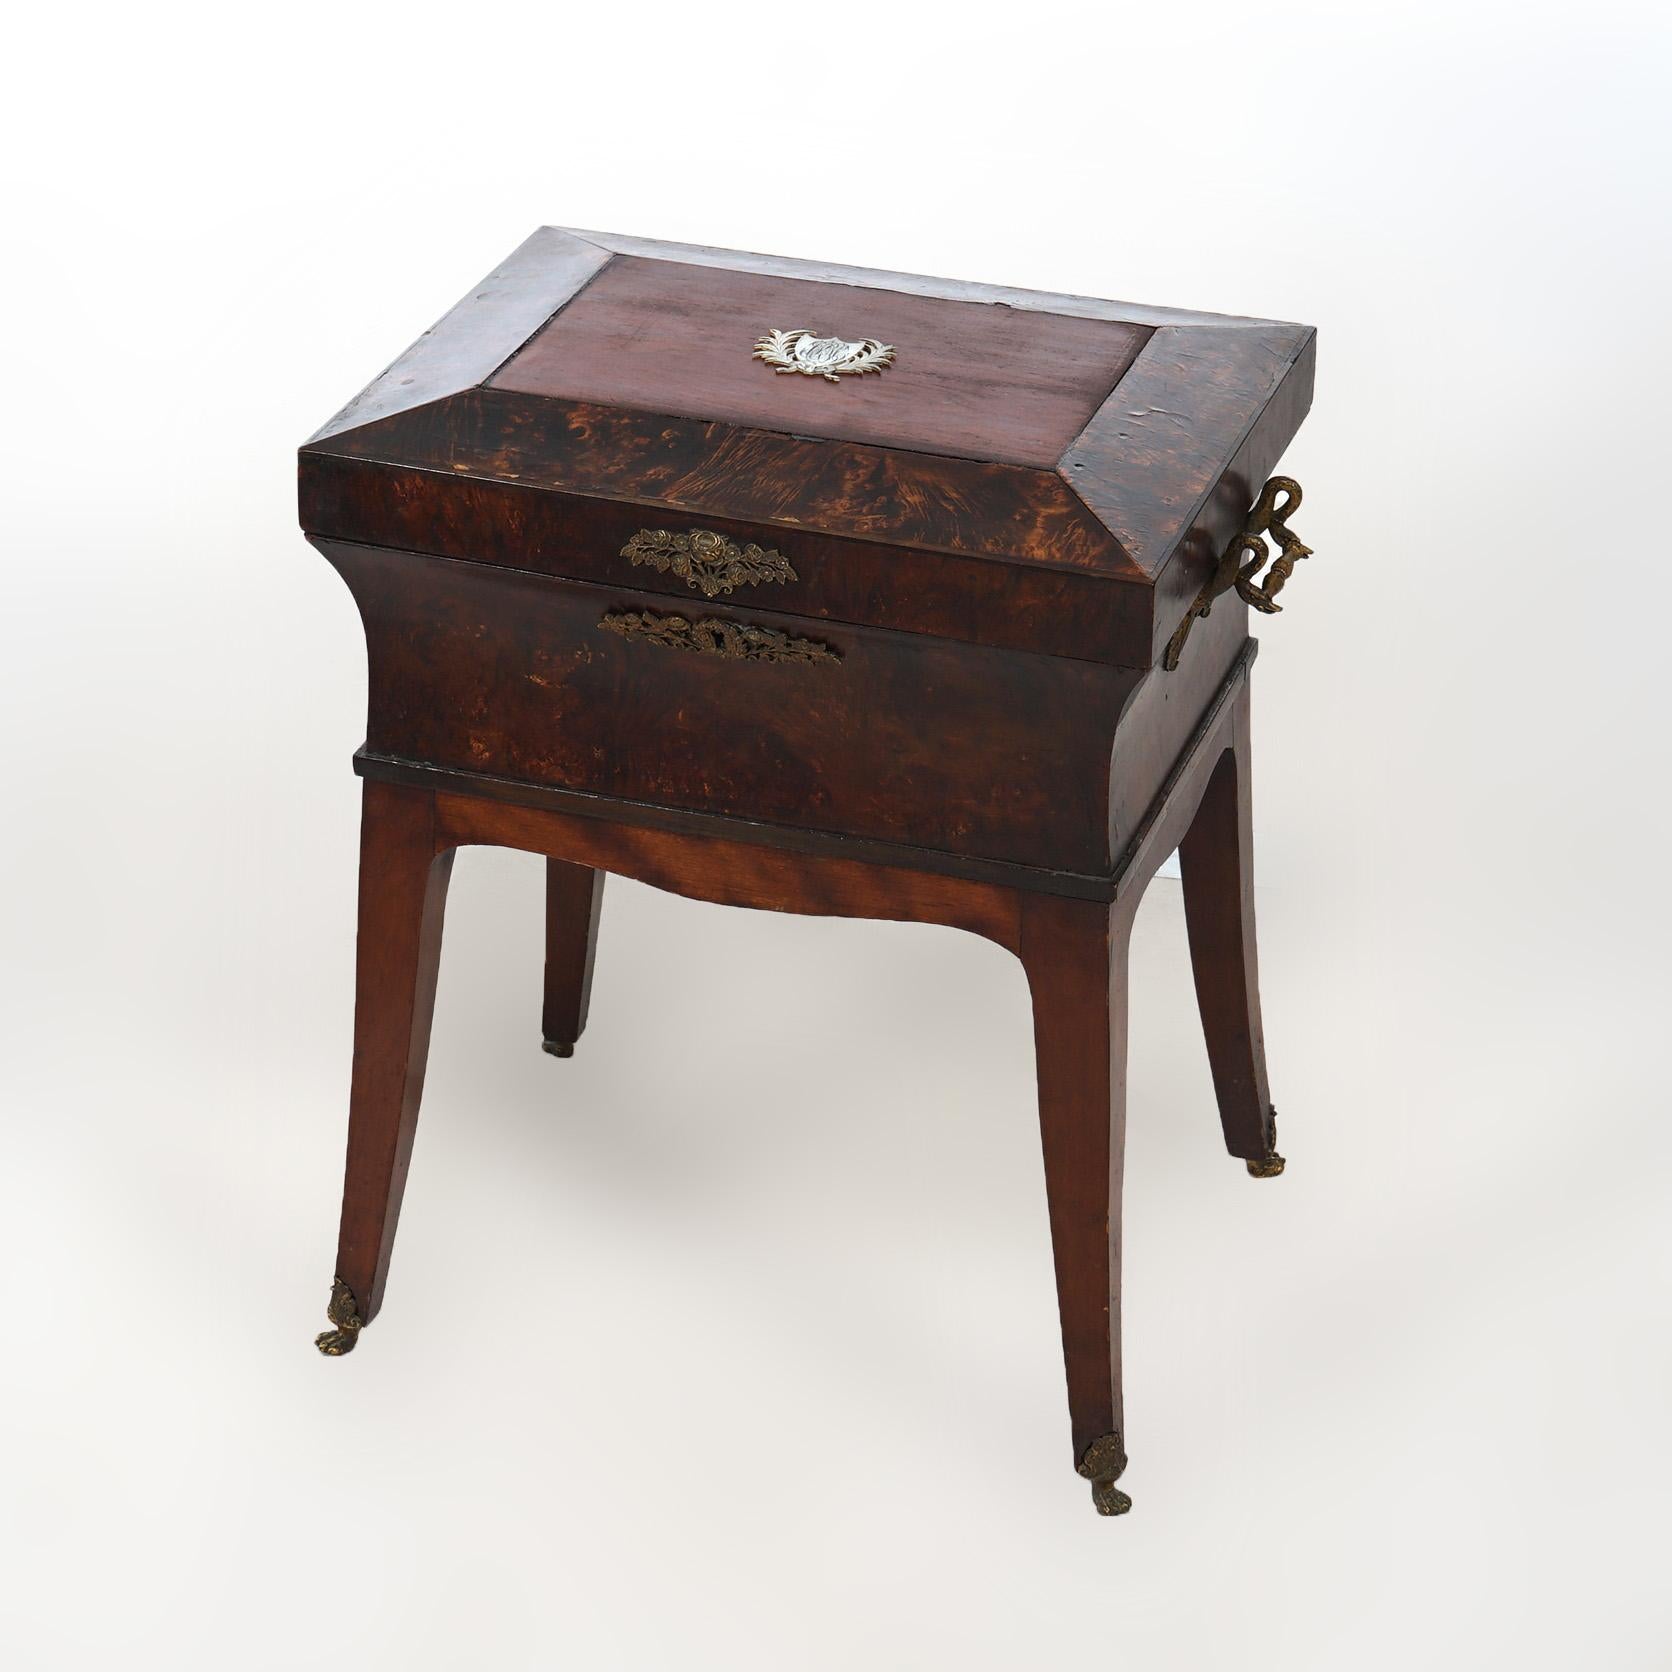 19th Century Antique French Louis XVI Inlaid Olive Wood Sewing Box or Jewel Chest c1800